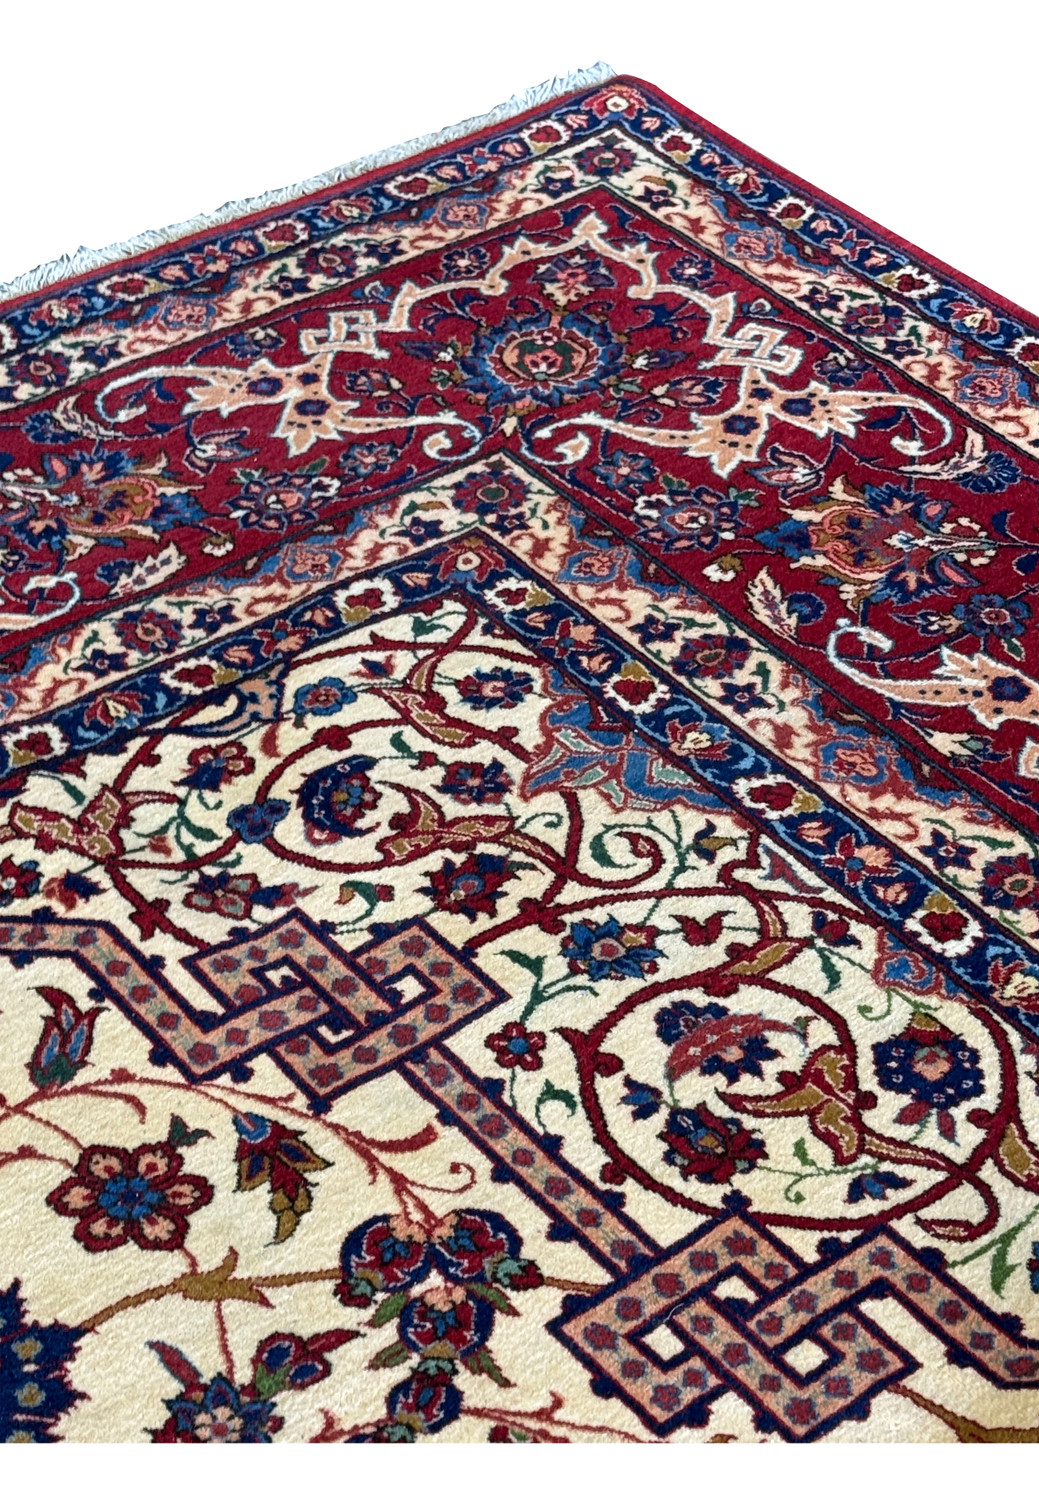 Side view of a 10'7 x 14'7 Persian Isfahan Wool & Silk Rug, showing the depth of the pile and the richness of the red border and ivory field.